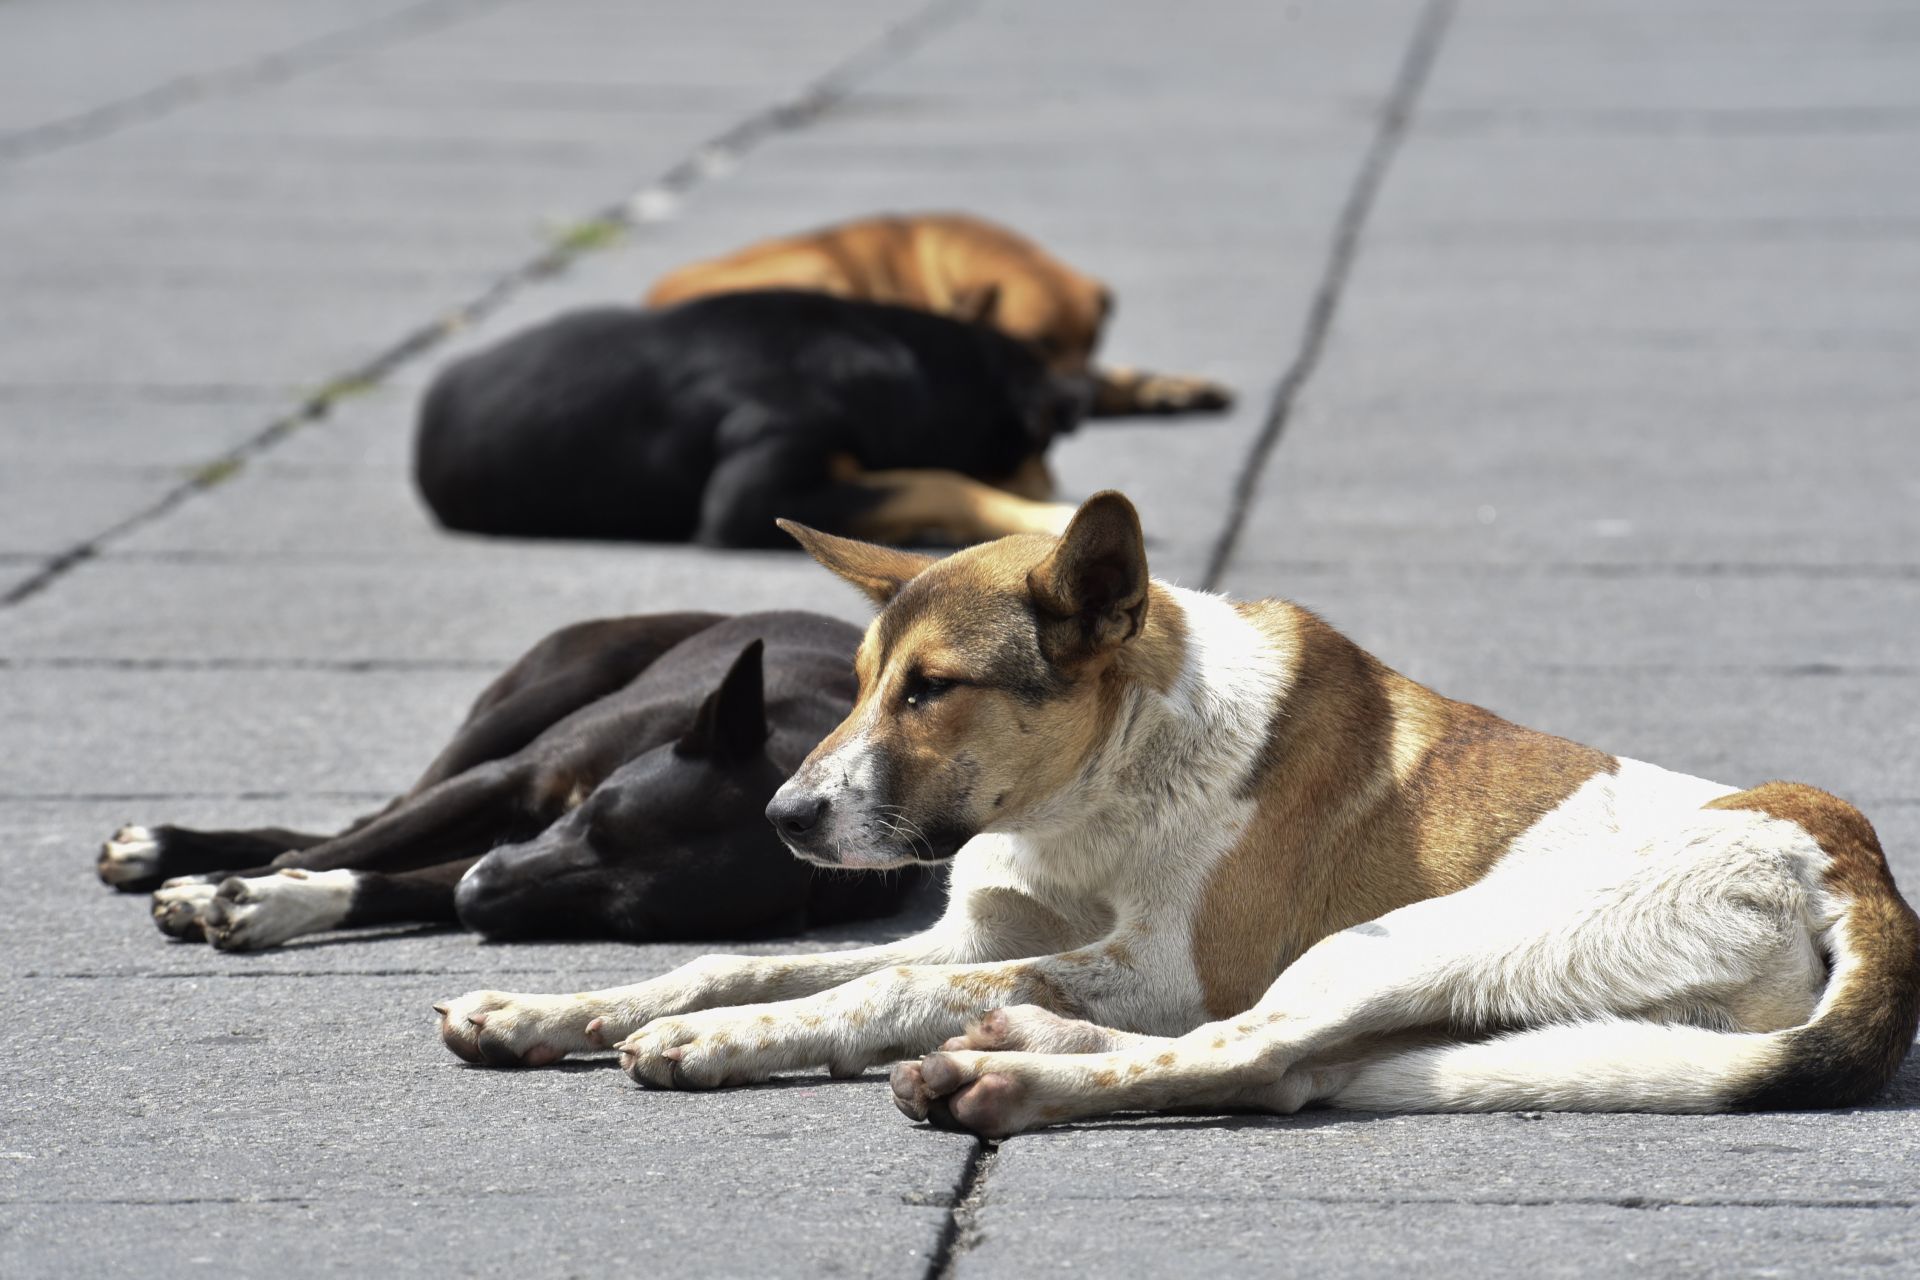 The study analyzed the behavior of street dogs of different breeds from different breeds (Crisanta Espinosa Aguilar / Cuartoscuro.com)